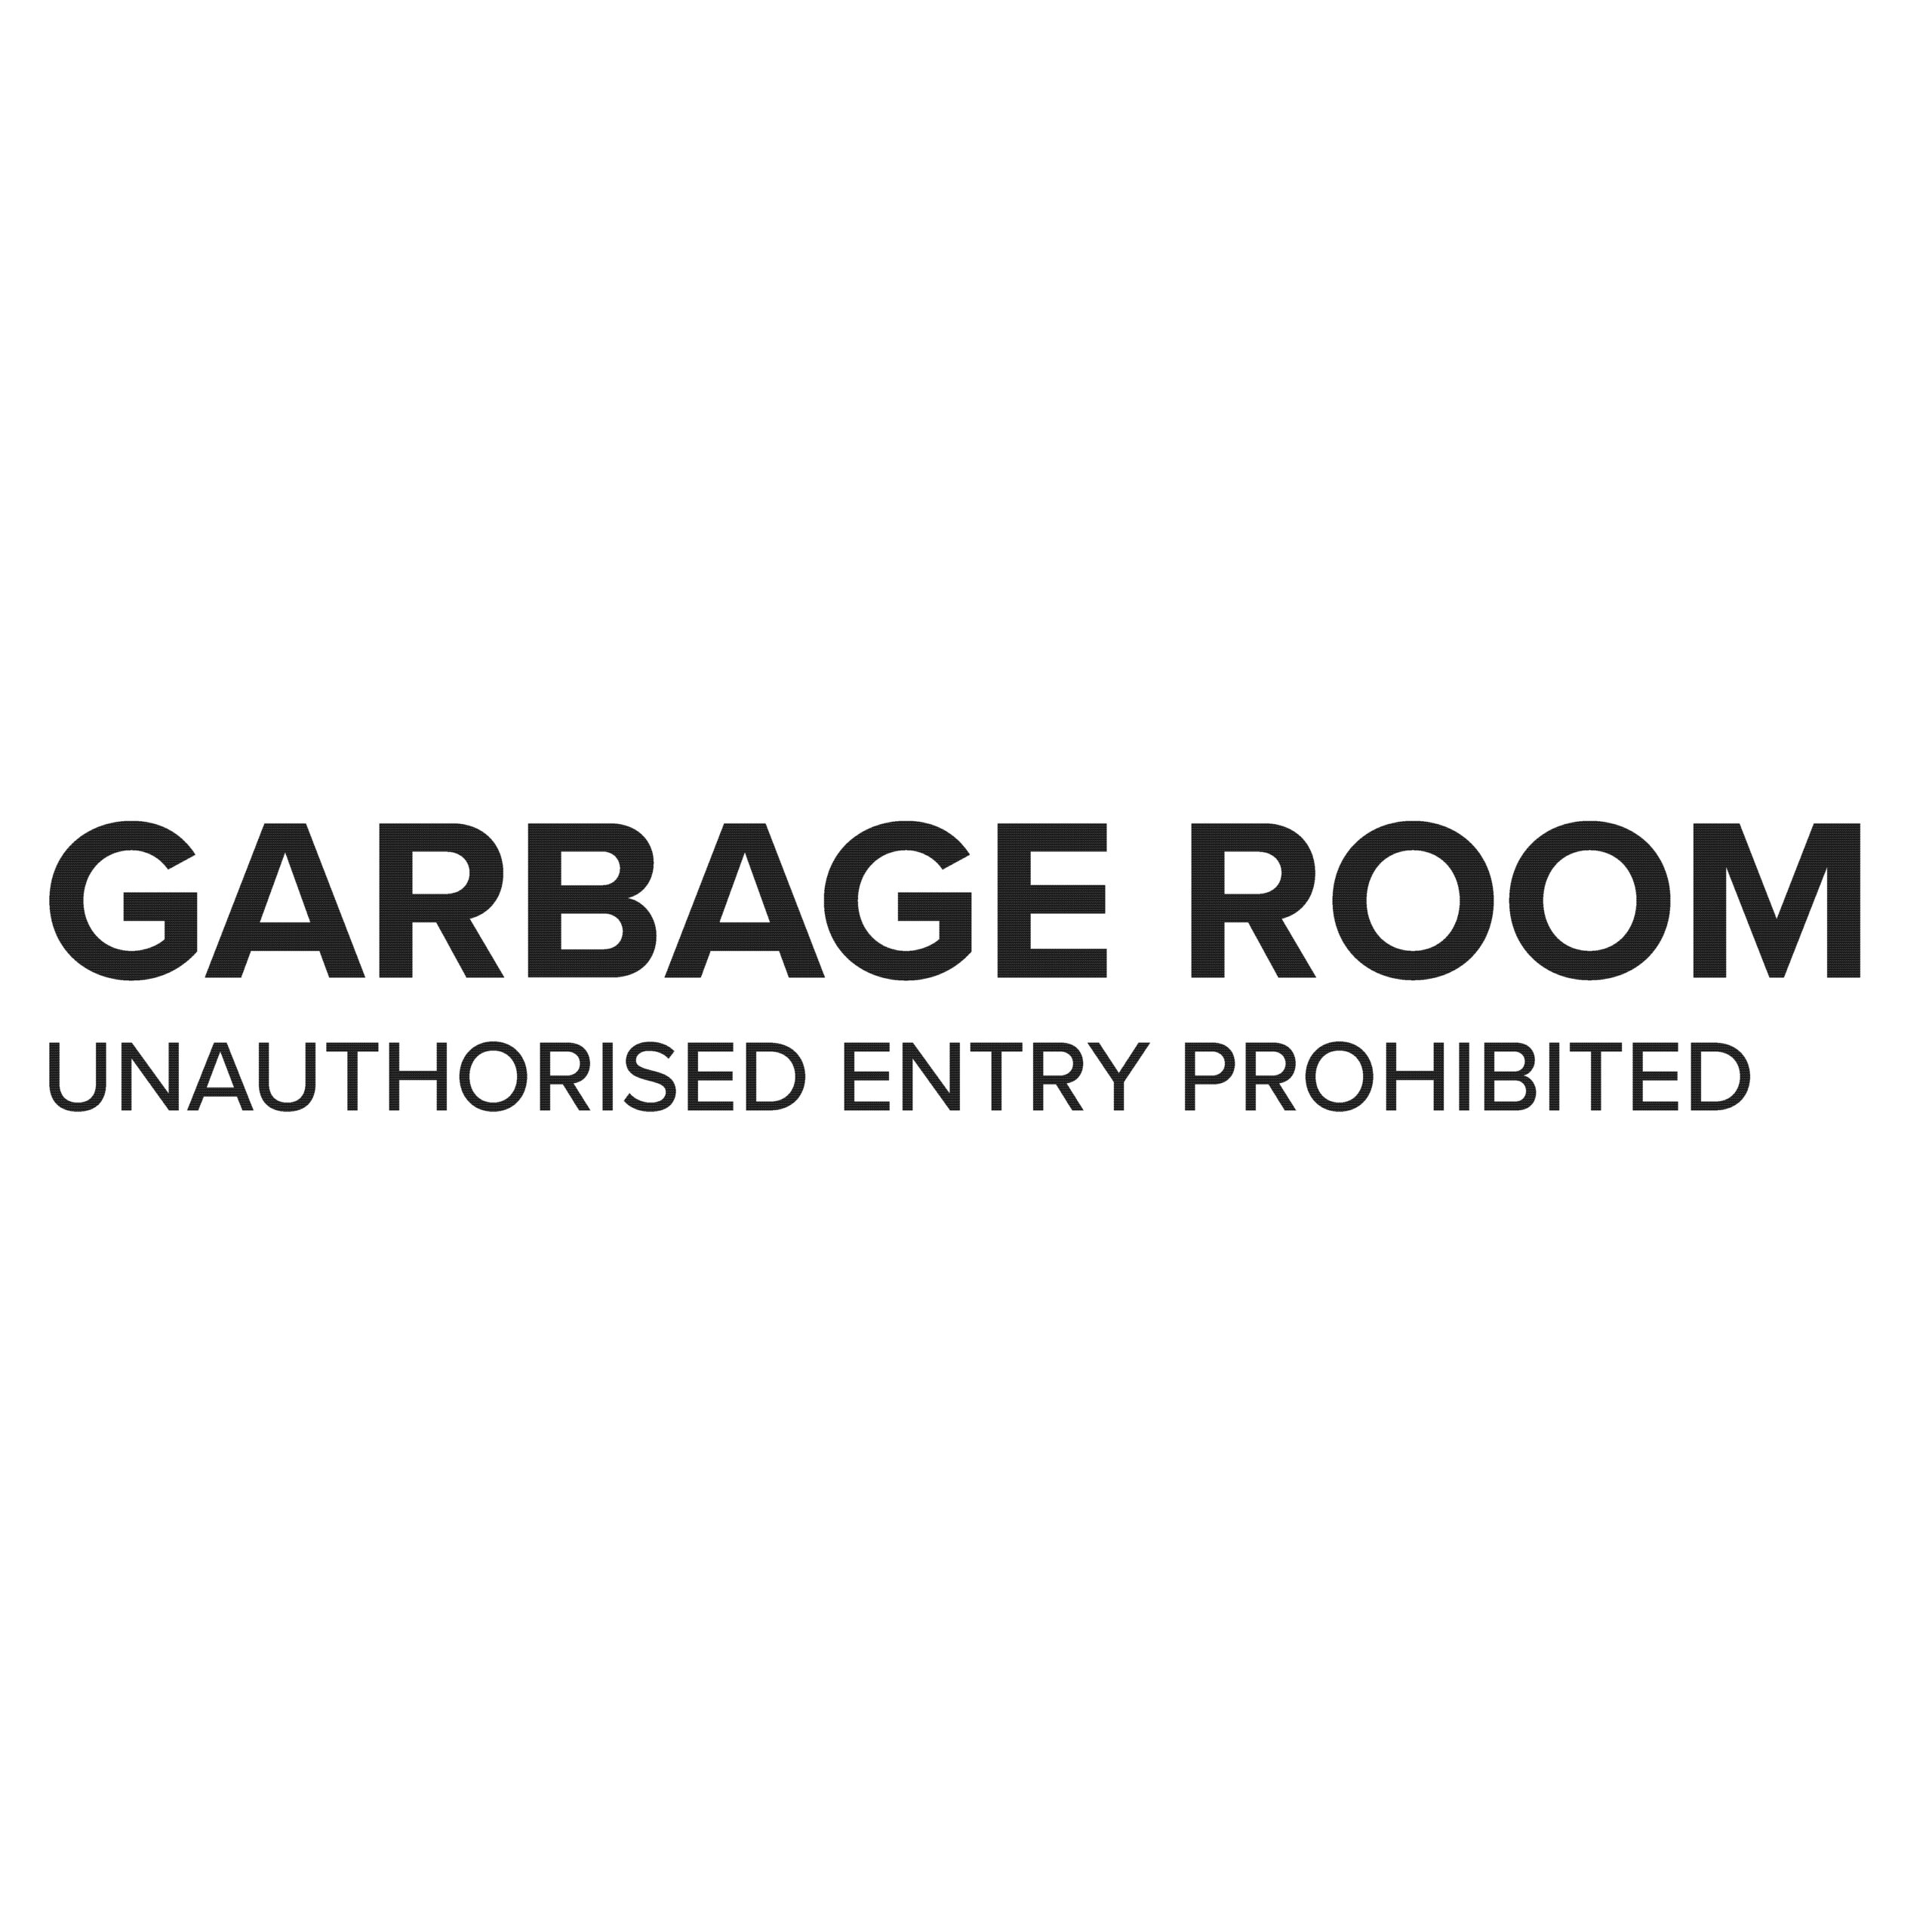 GARBAGE ROOM SIGN 1 scaled